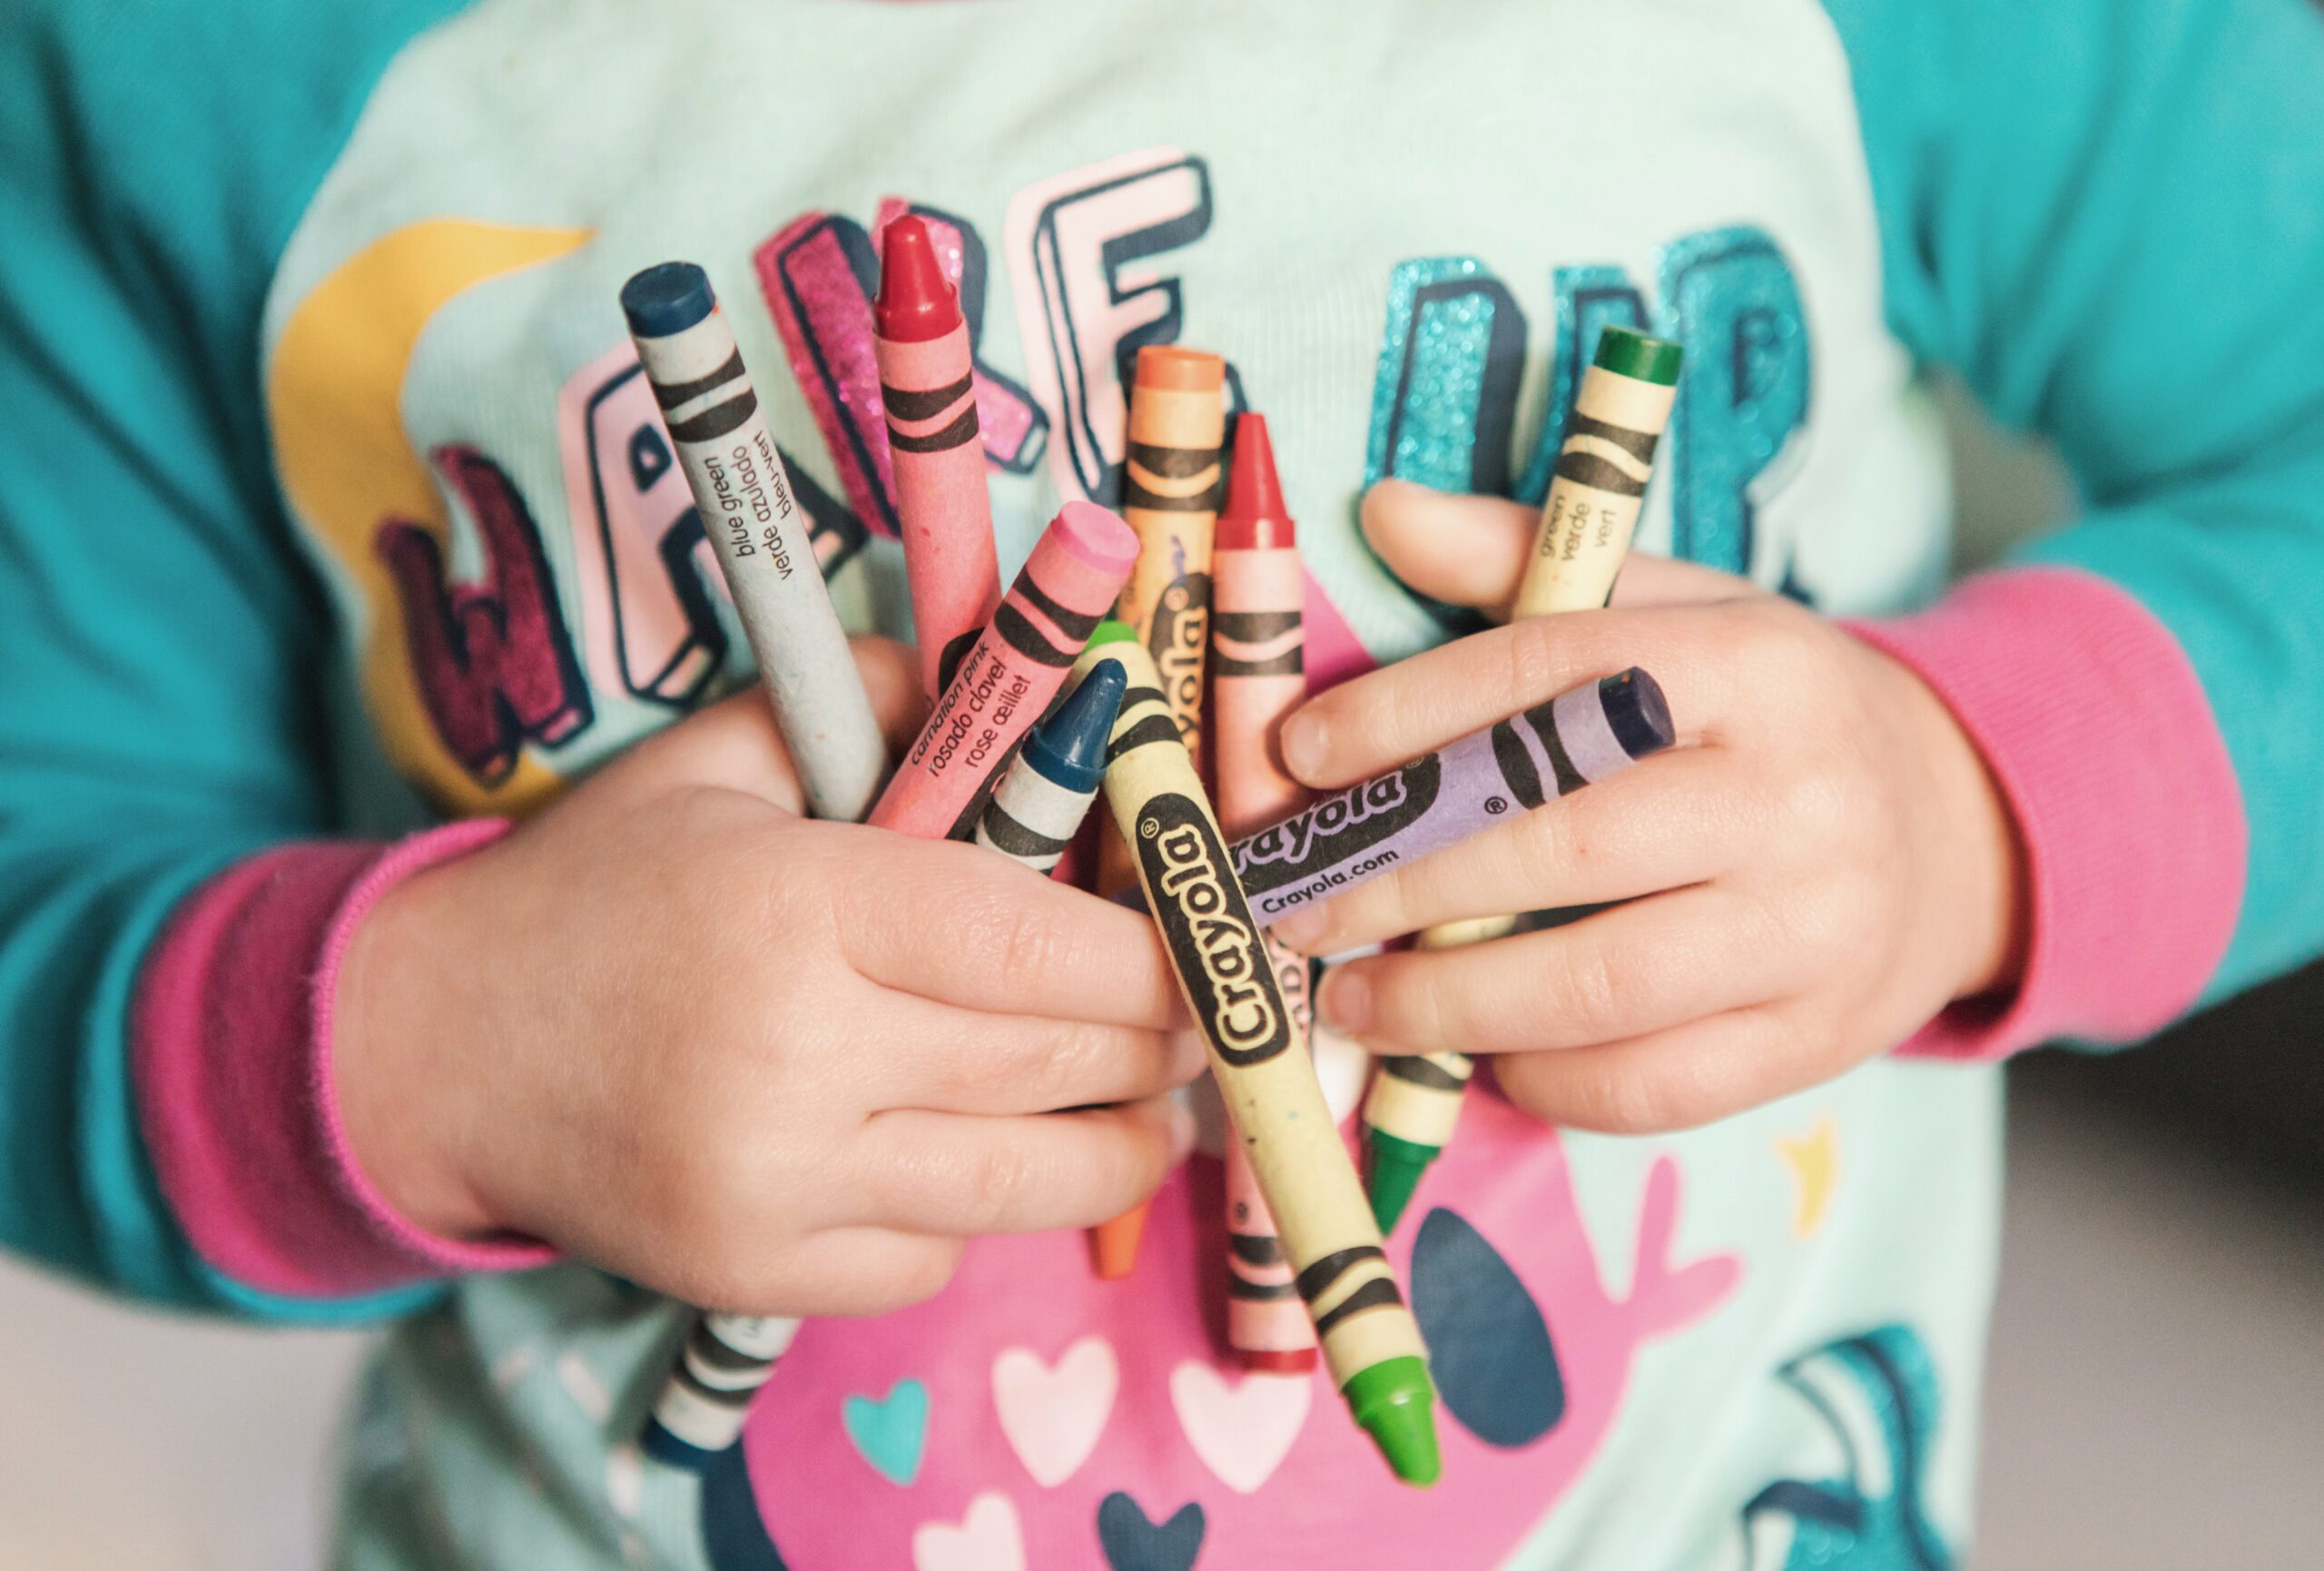 A close up of a childs chest who's holding several crayons